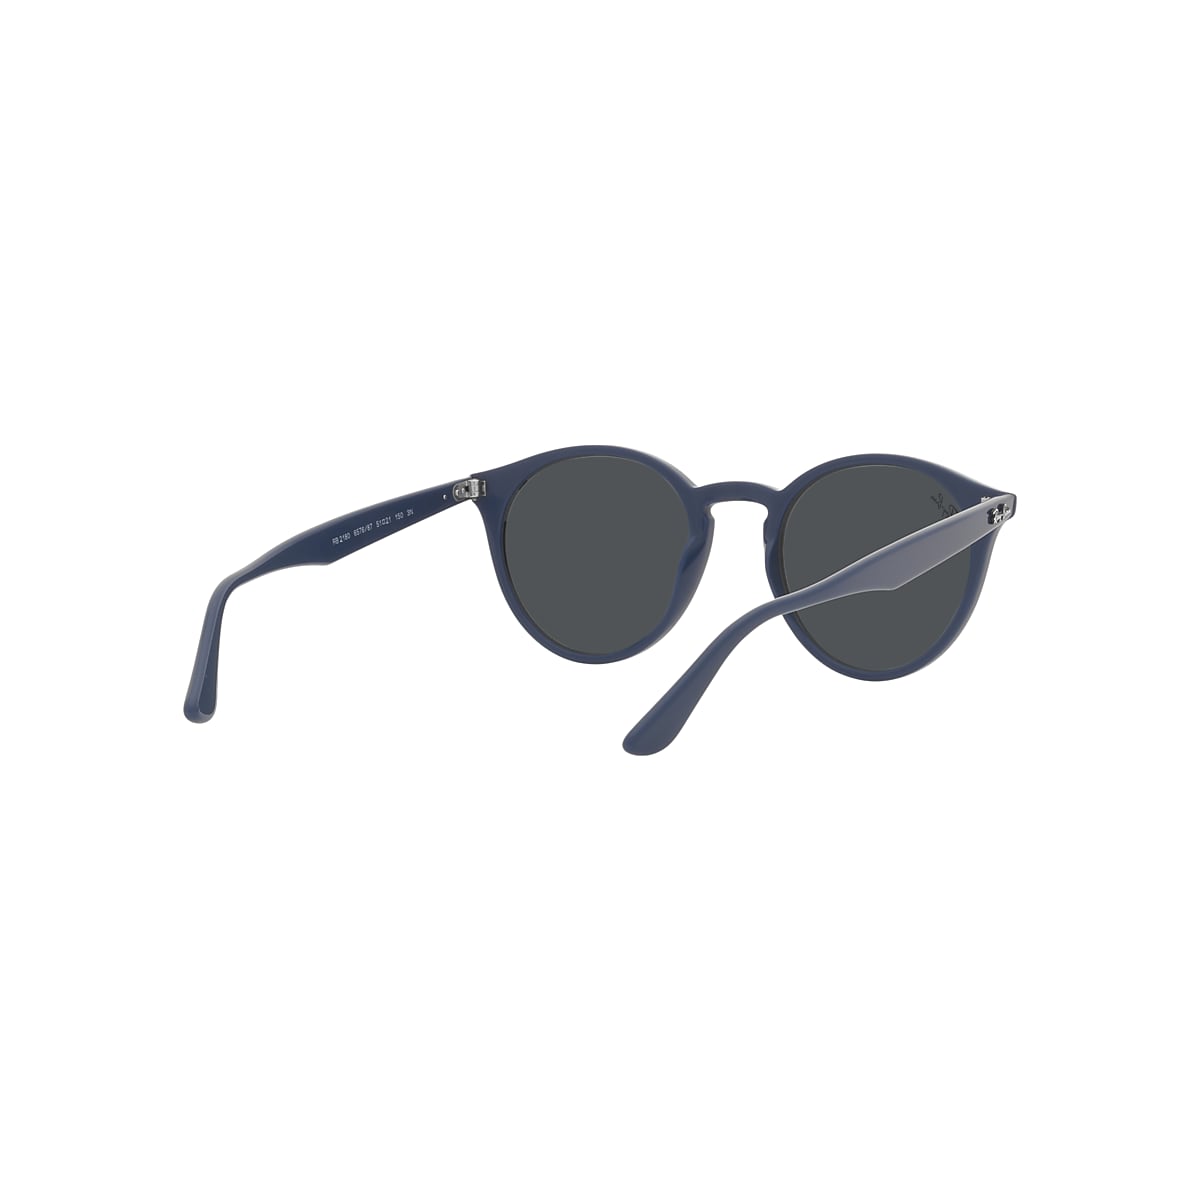 RB2180 Sunglasses in Blue and Dark Grey - RB2180 | Ray-Ban® US